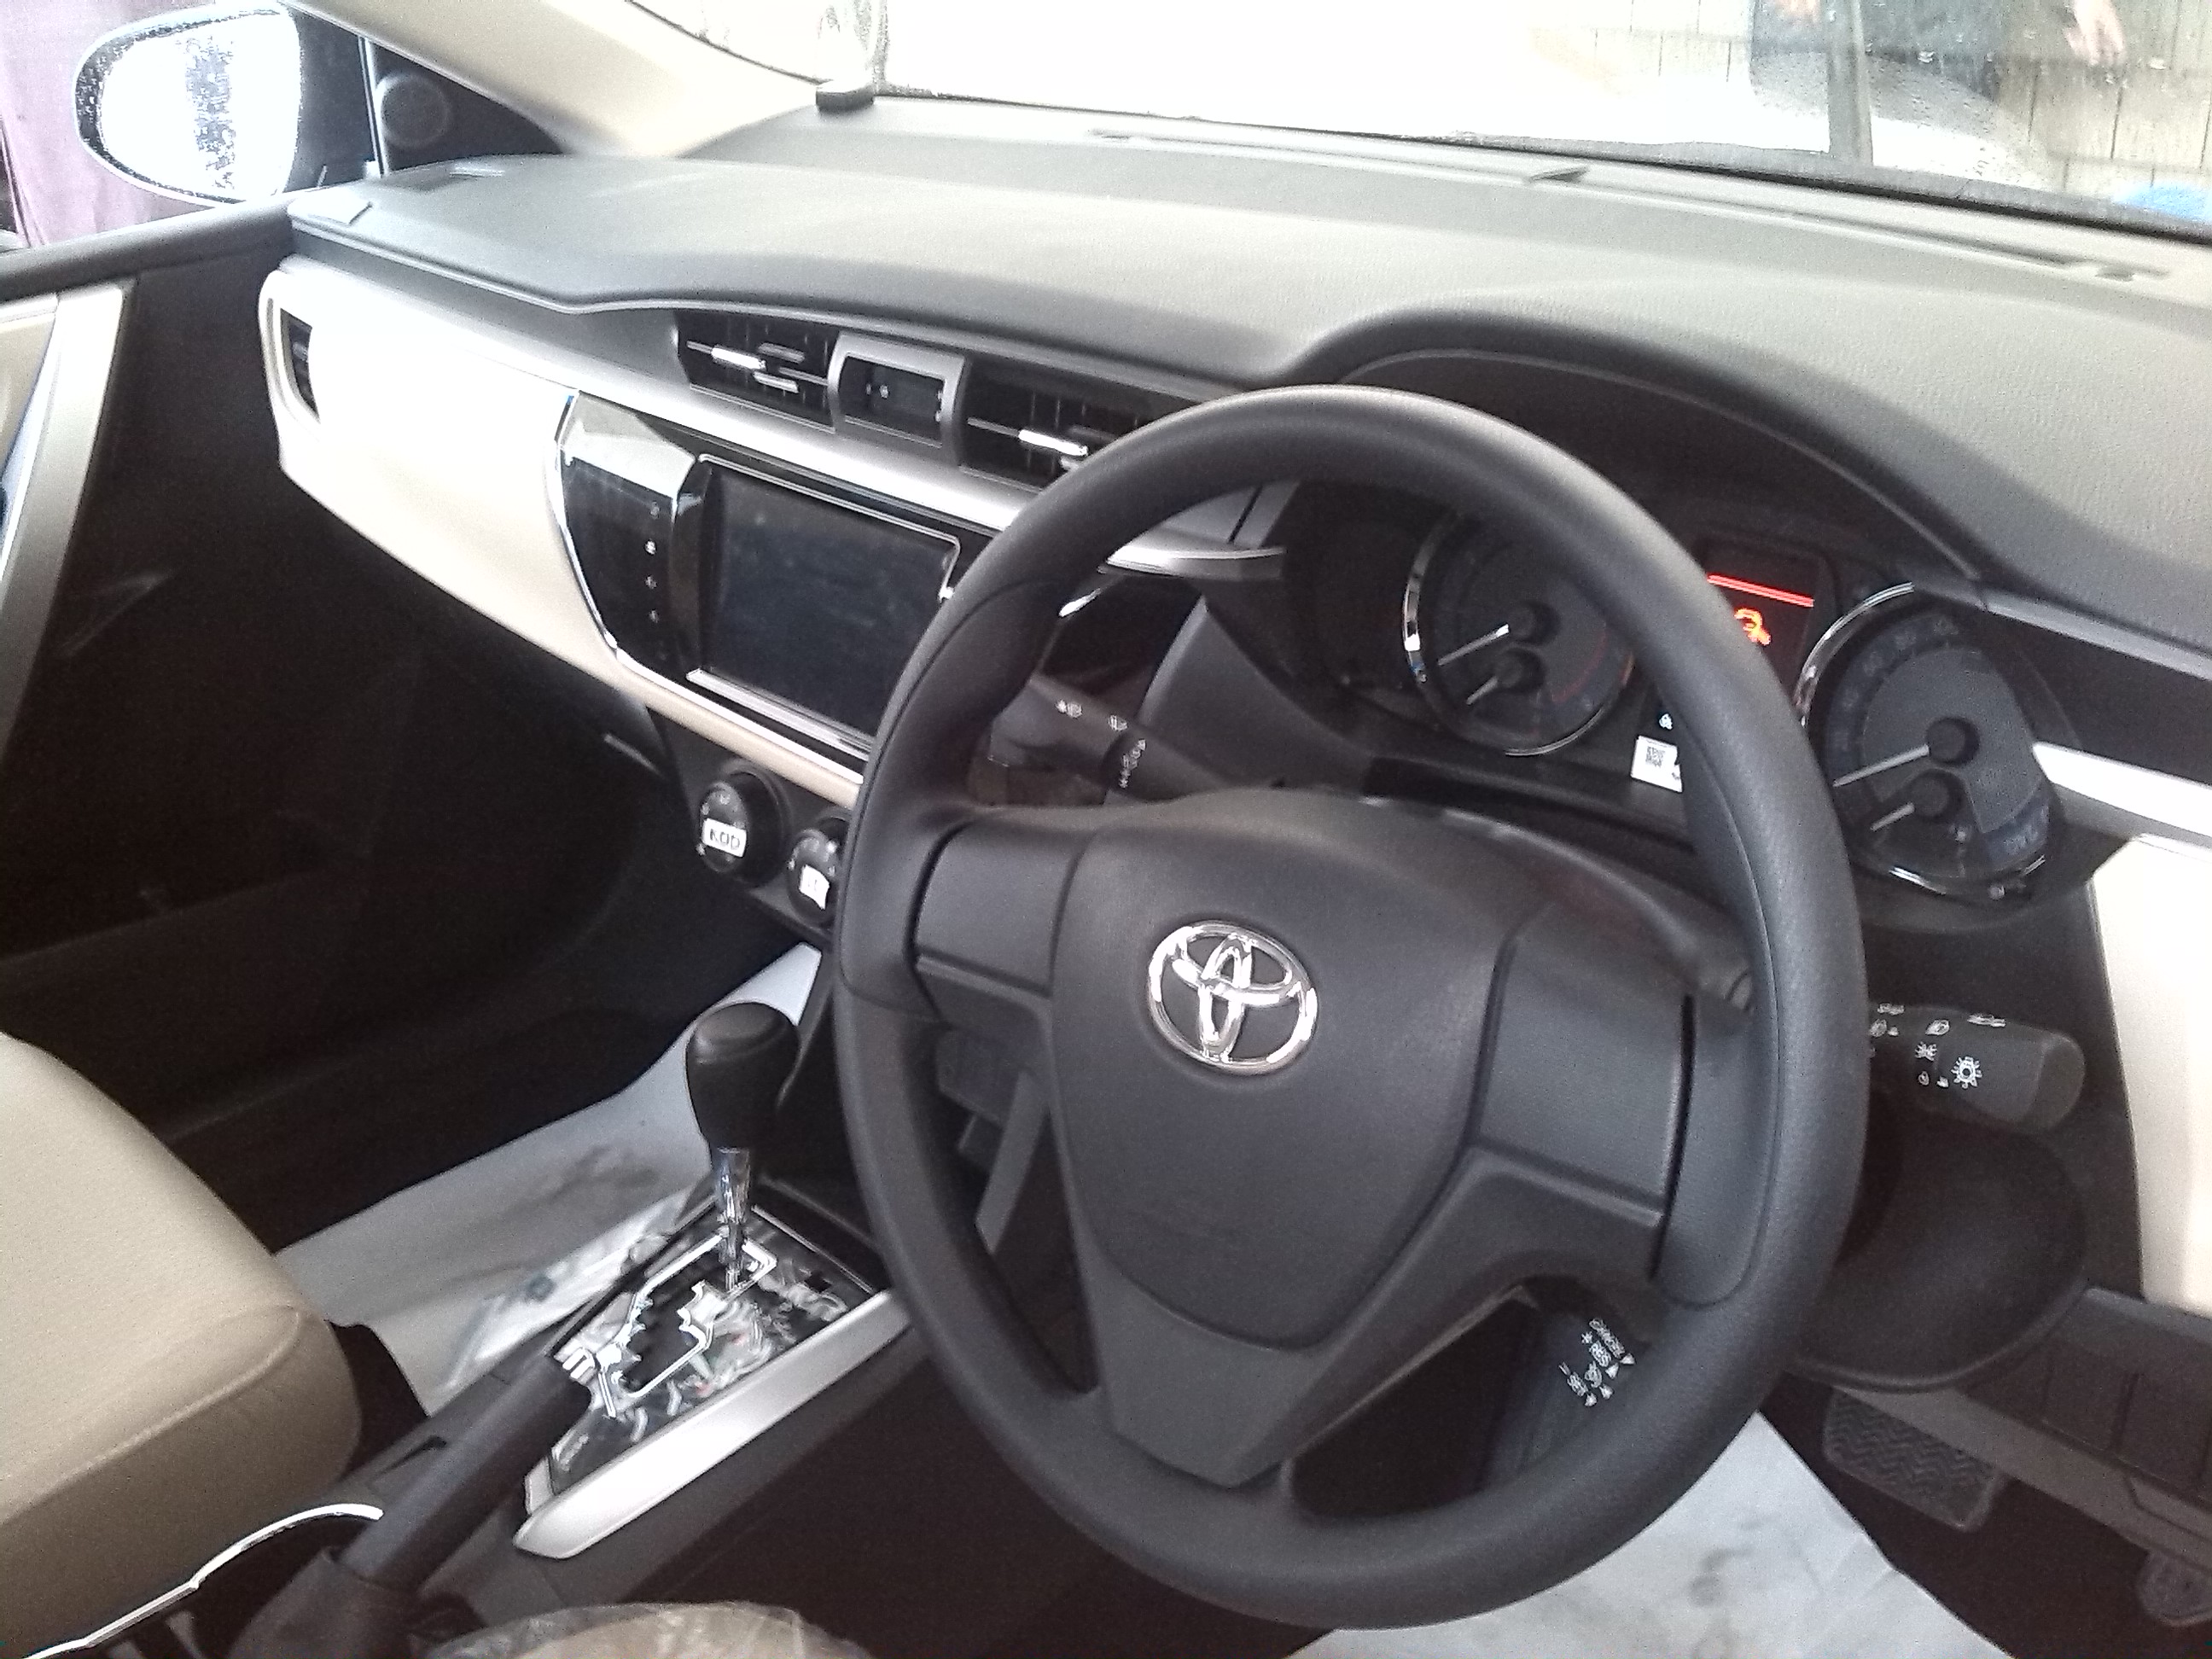 All About Cars 2015 Toyota Corolla Getting Ready For Display